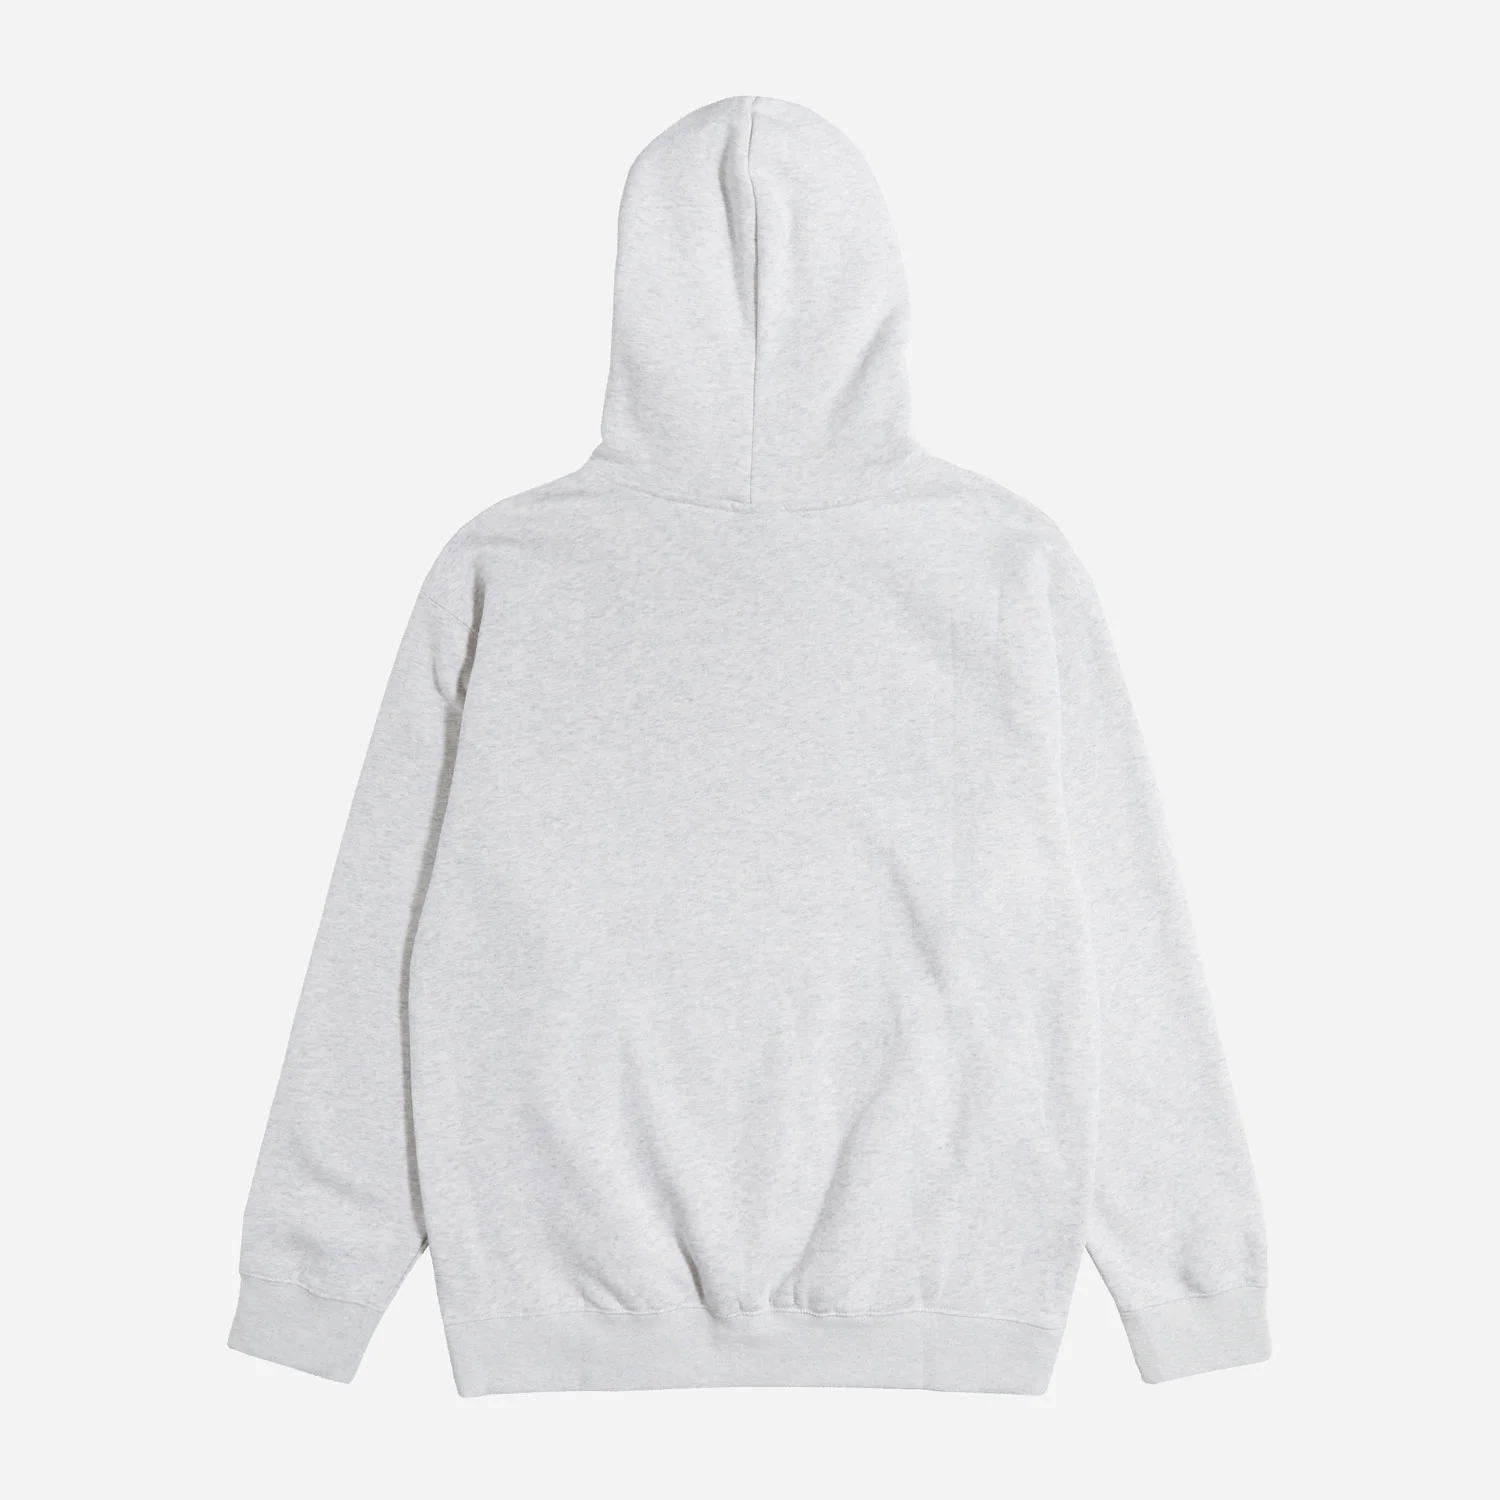 HUF x Thrasher Bayview Pullover Hoodie - Athletic Heather